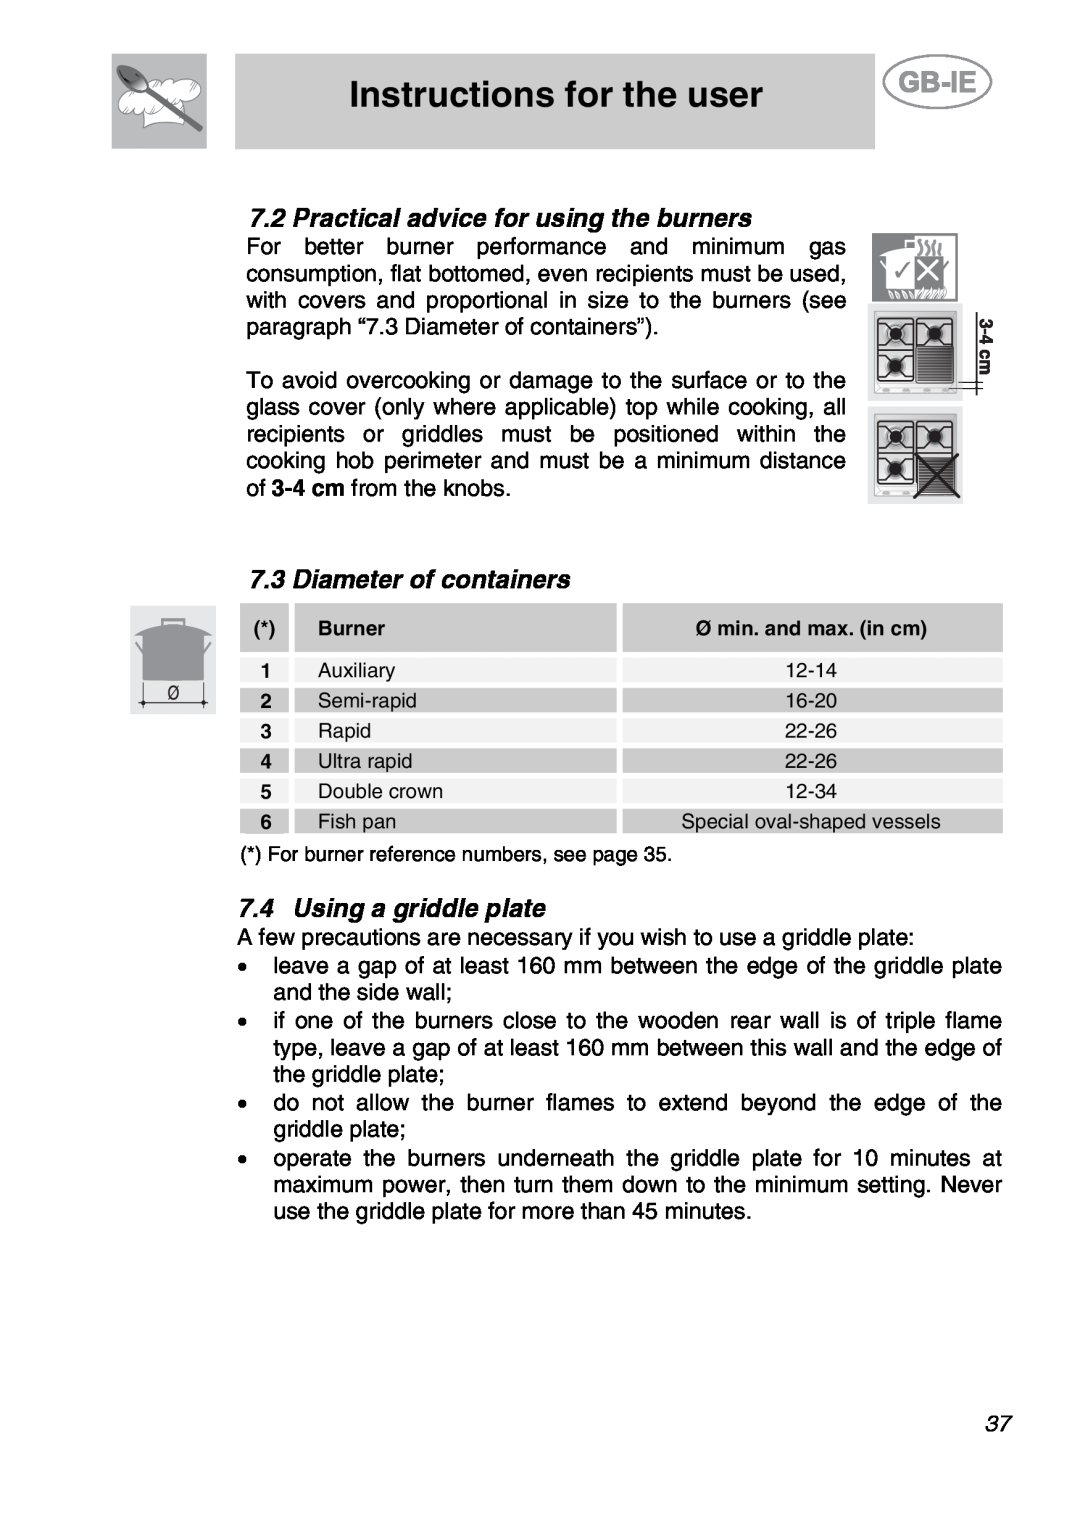 Smeg GCO90XG manual Instructions for the user, Practical advice for using the burners, Diameter of containers 